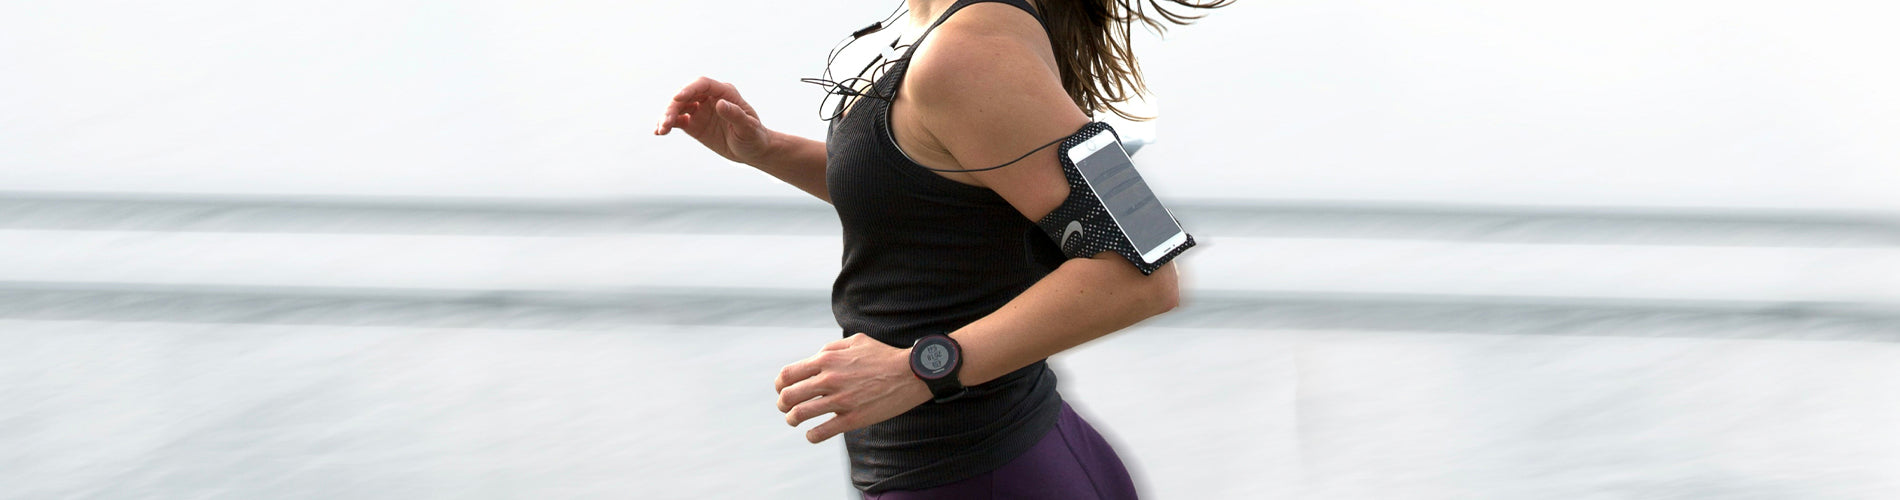 Why Do Runners Use Watches